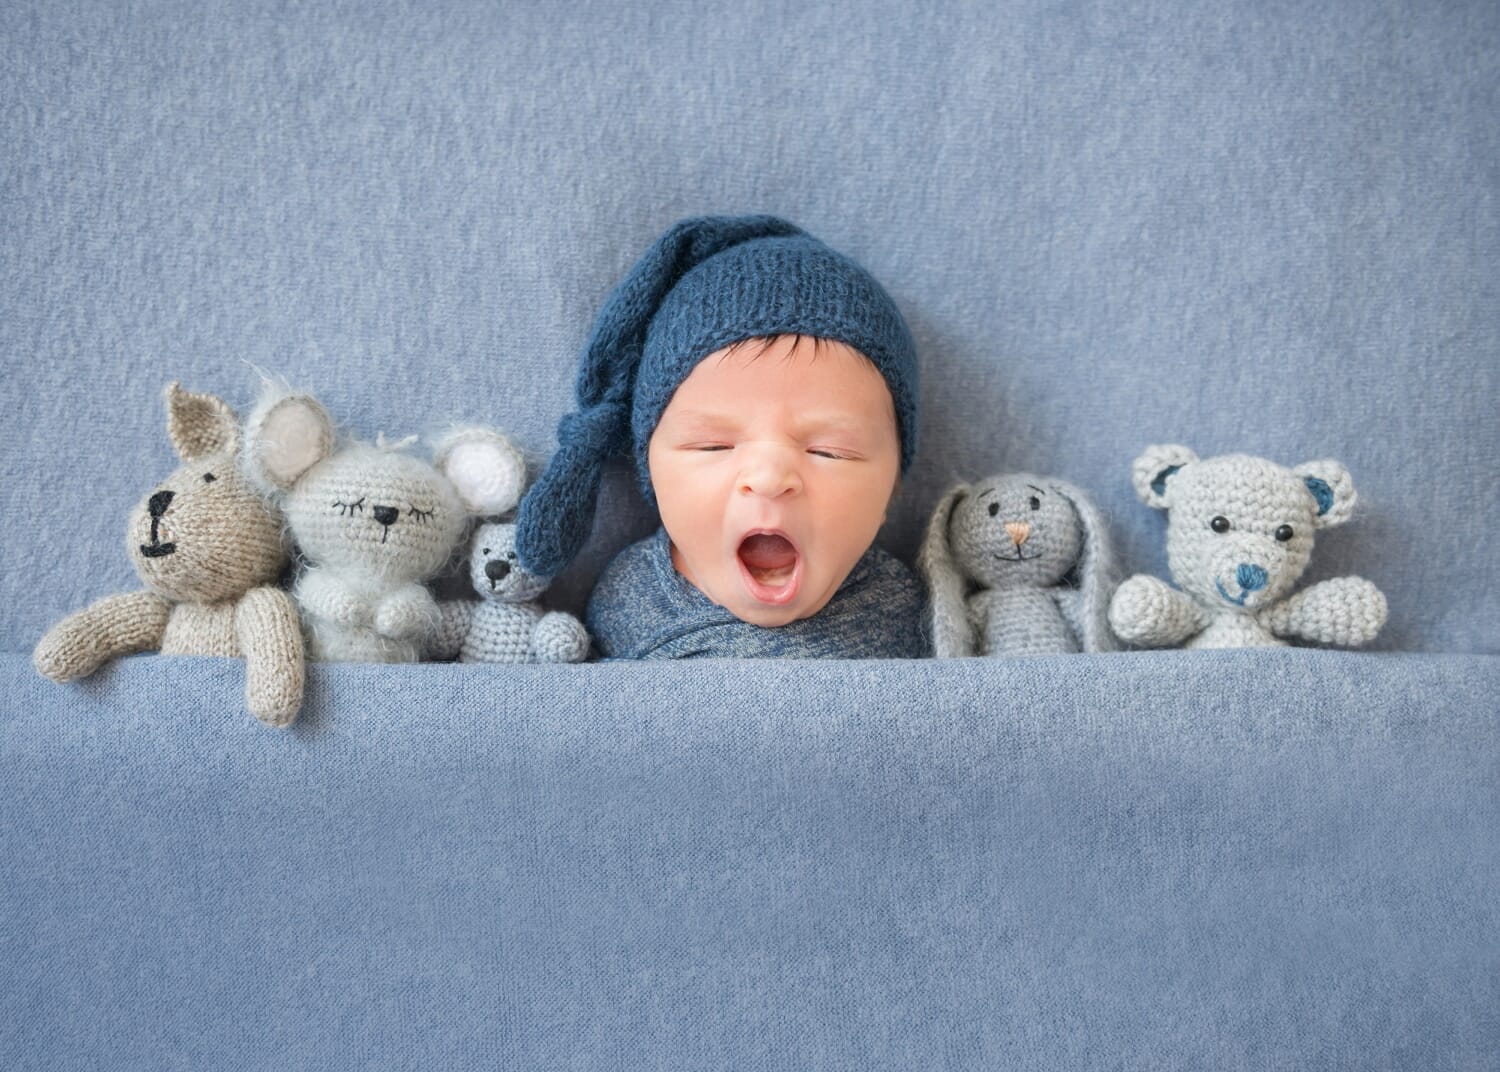  Newborn  Photography  Tips  5 Tips  to Capture the Right Moment 